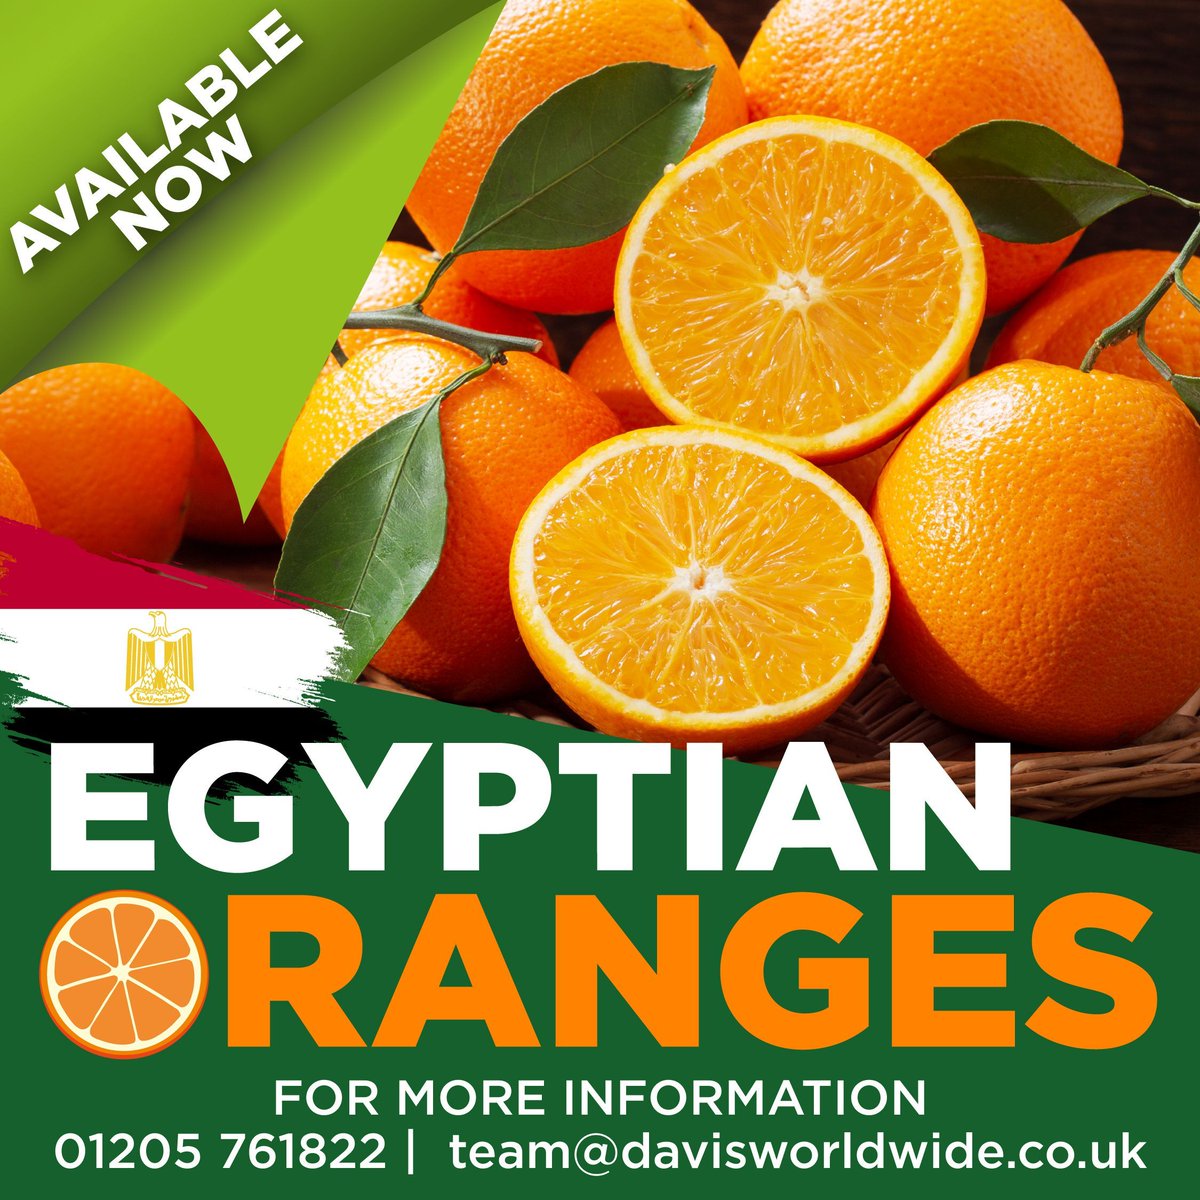 A Small to medium sized seedy fruit, very nutritious, offering a host of vitamins, minerals and plant compounds that help keep you healthy.

For further information call 01205 761822 or email team@davisworldwide.co.uk

#oranges #orange #fruit #citrus #fruits #freshfruits #juice